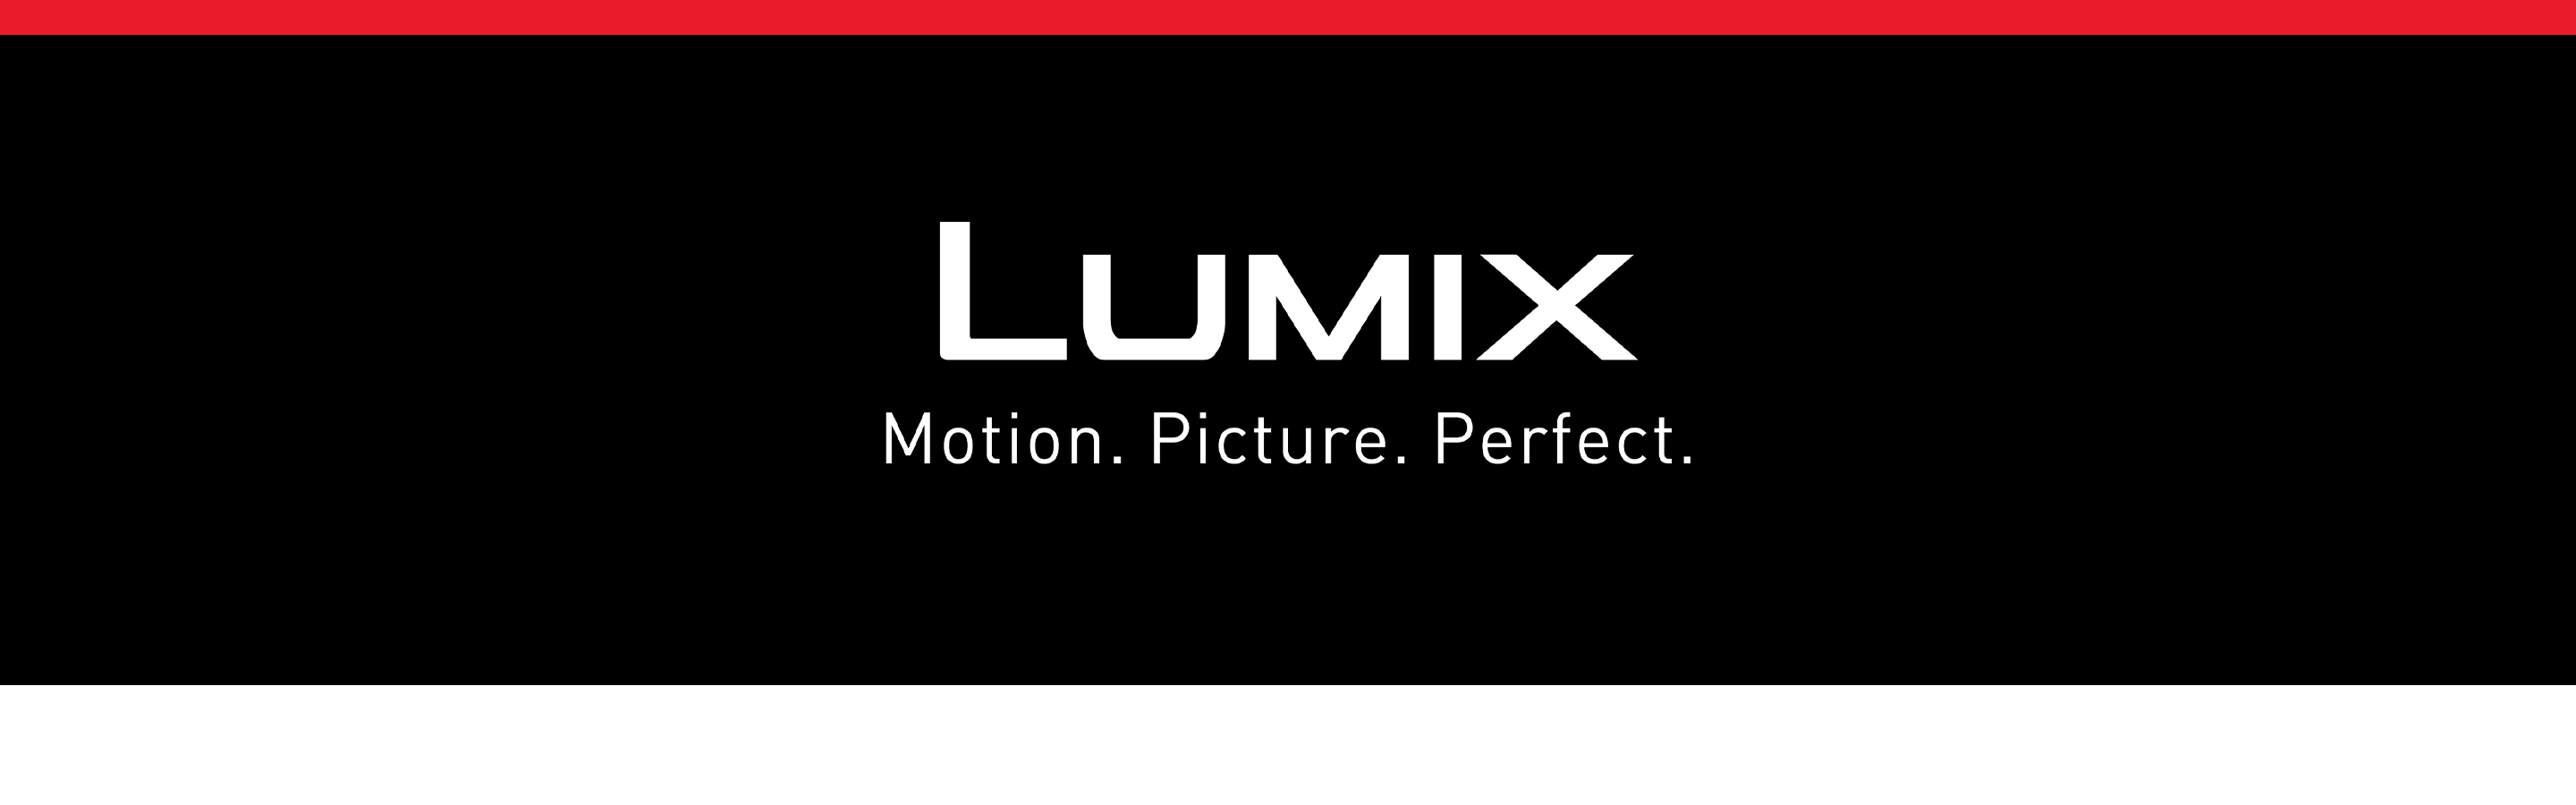 LUMIX—Motion. Picture. Perfect.